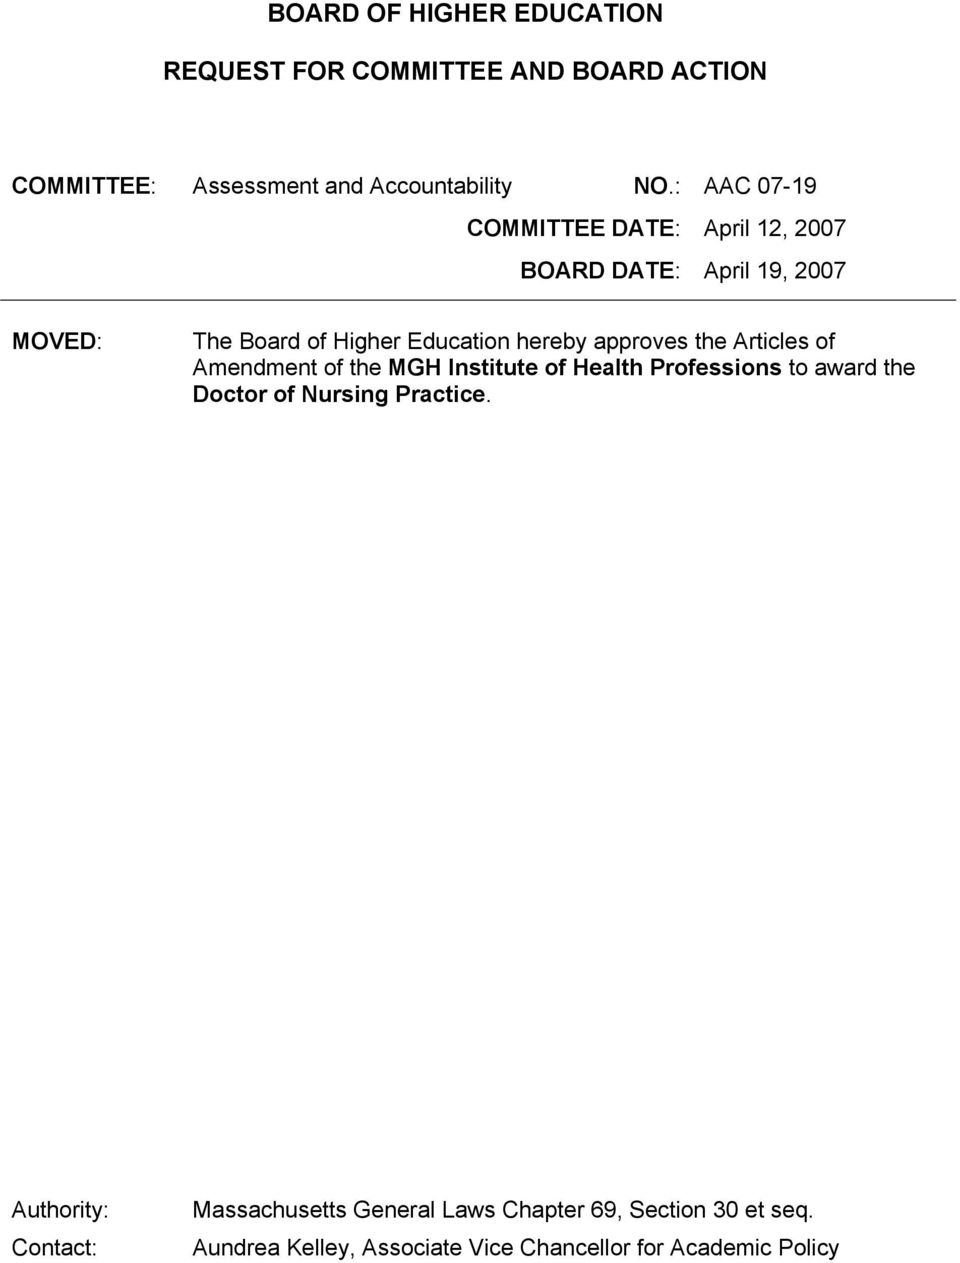 approves the Articles of Amendment of the MGH Institute of Health Professions to award the Doctor of Nursing Practice.